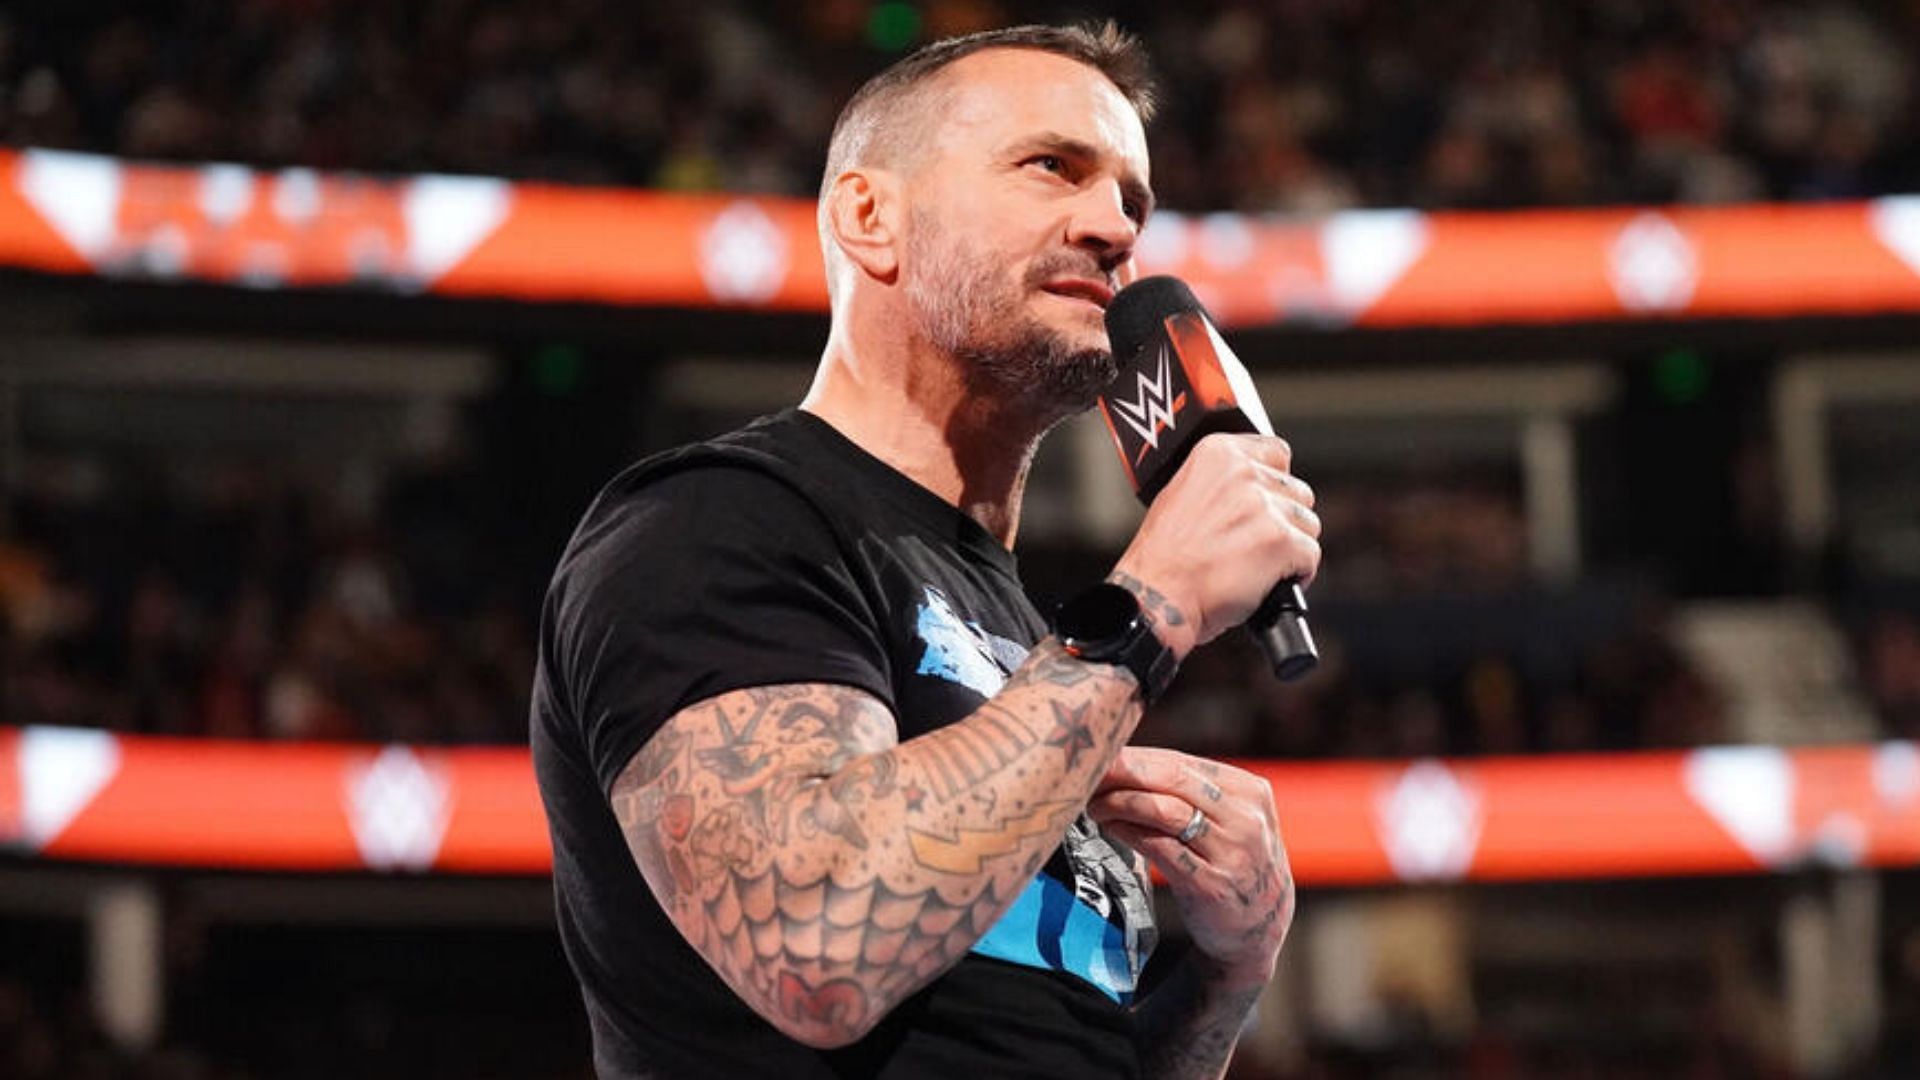 Punk is currently out of action with an injury.